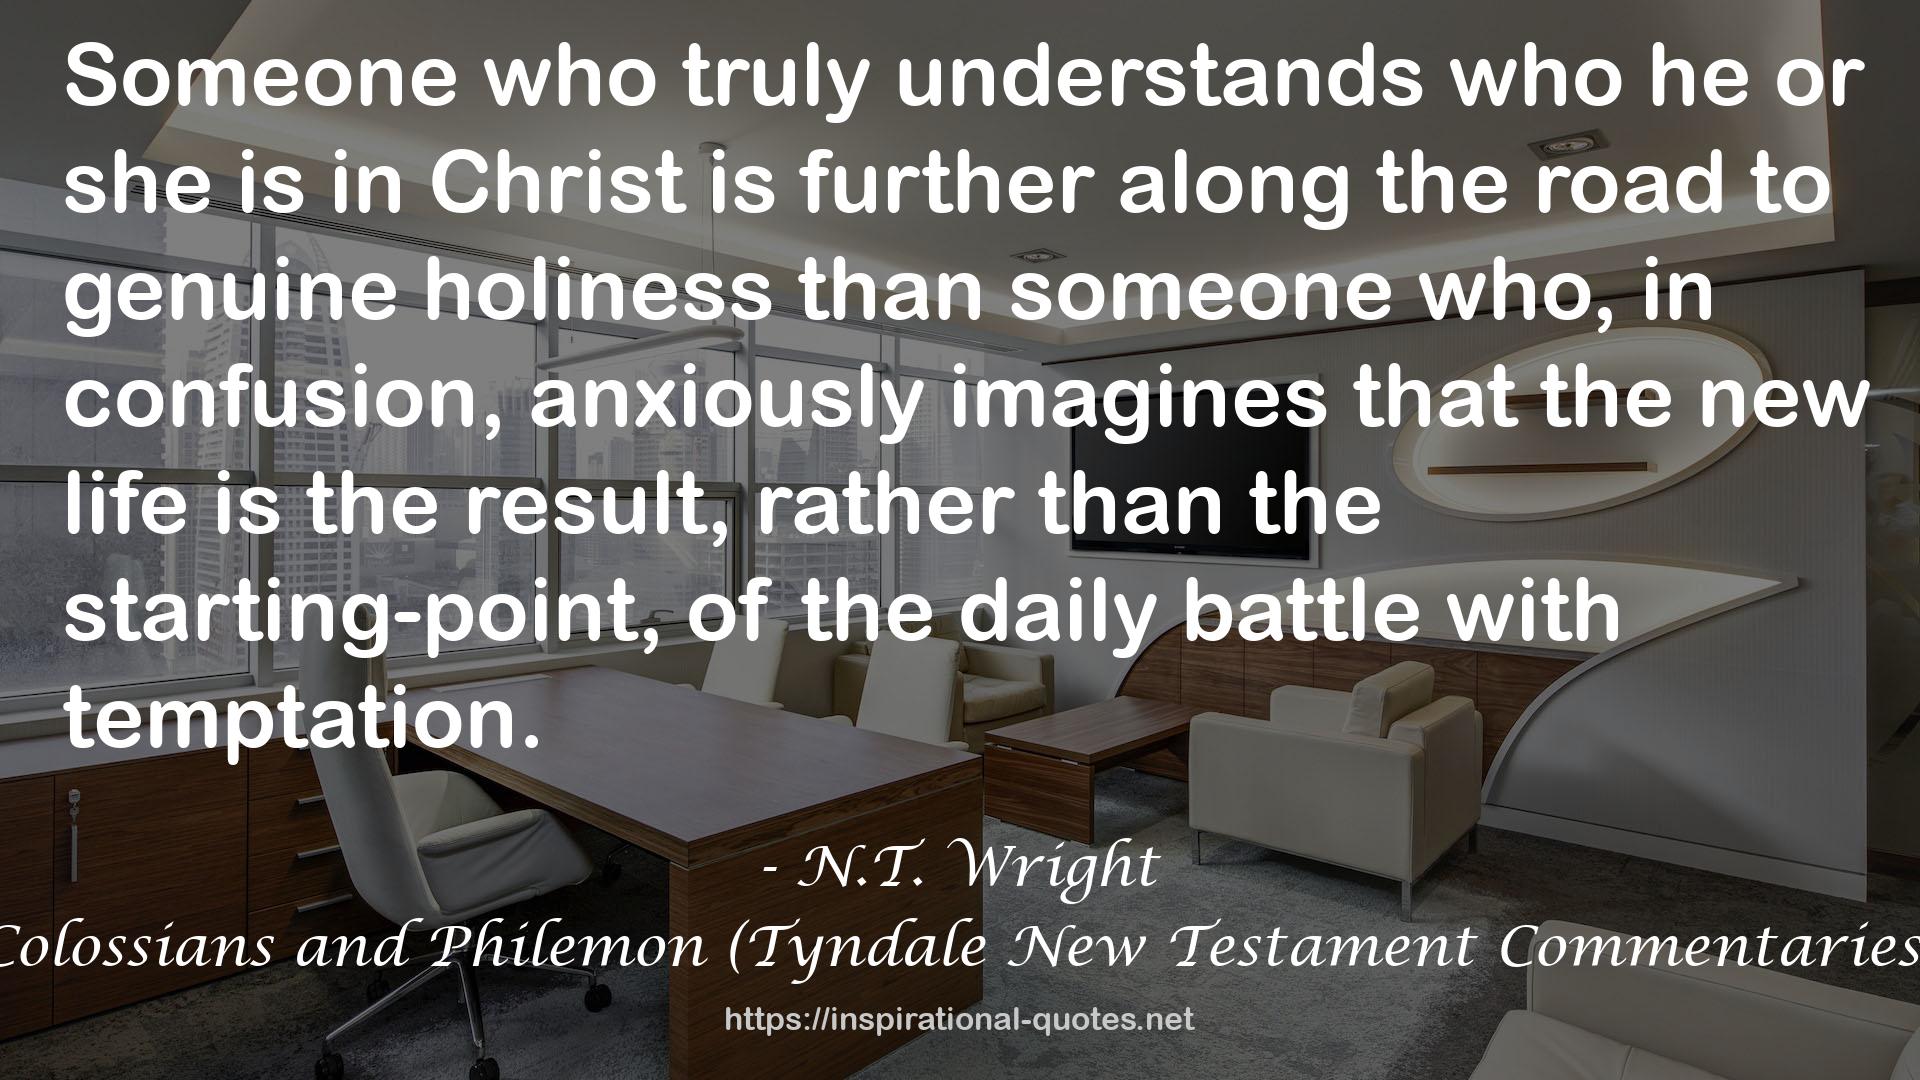 Colossians and Philemon (Tyndale New Testament Commentaries) QUOTES